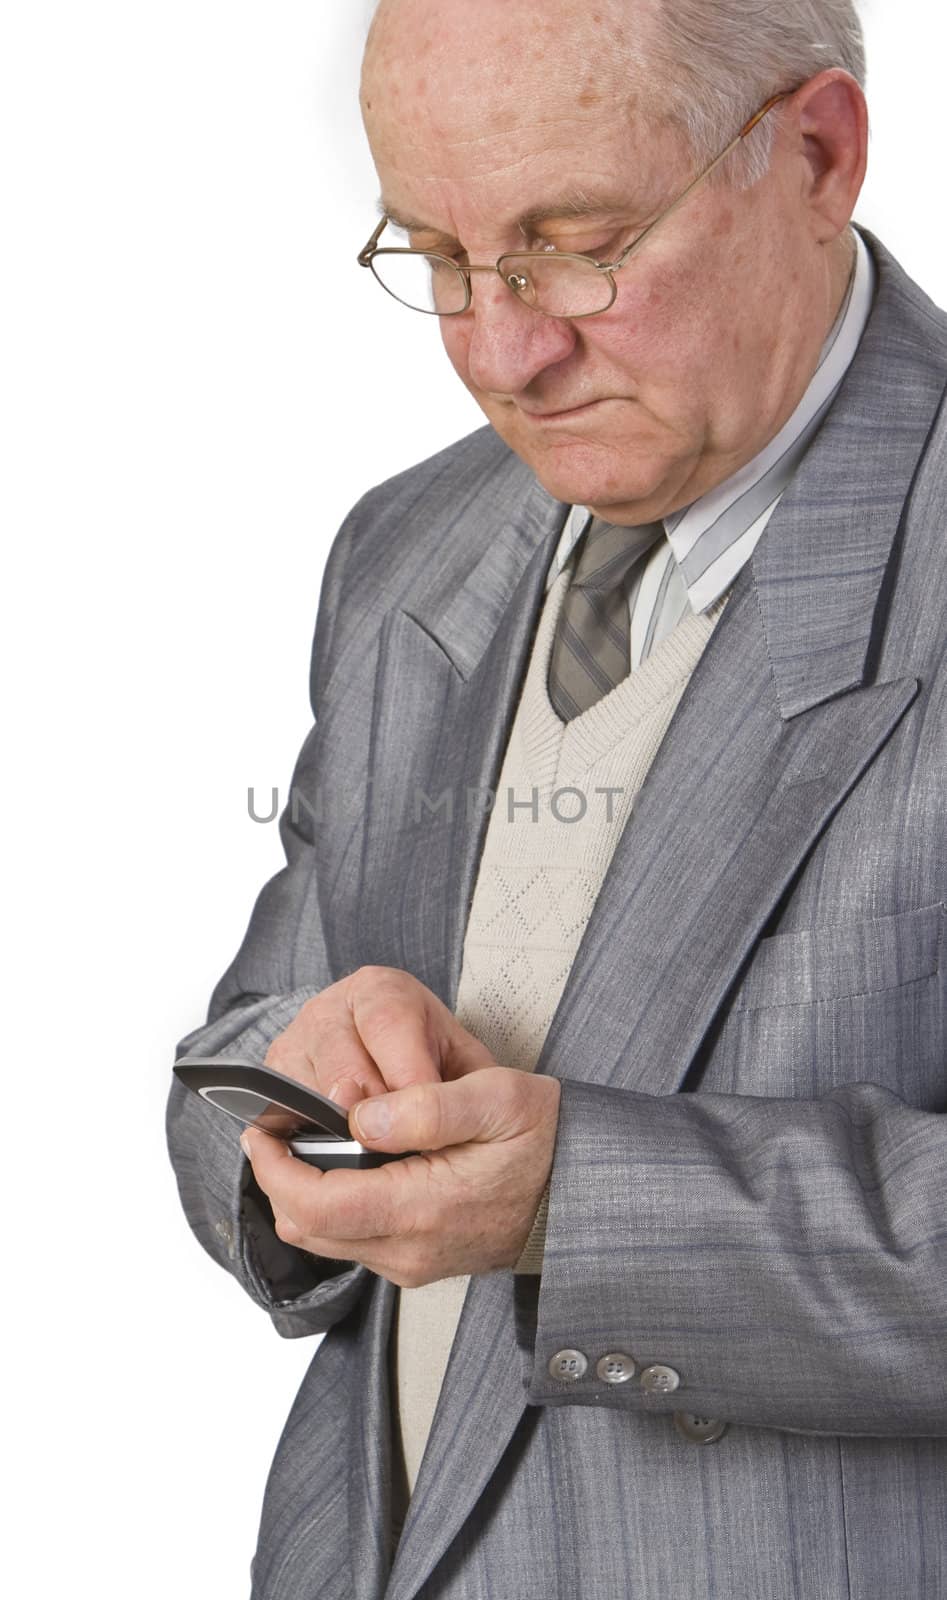 Close-up image of a senior man using a mobile phone.Shot with Canon 70-200mm f/2.8L IS USM